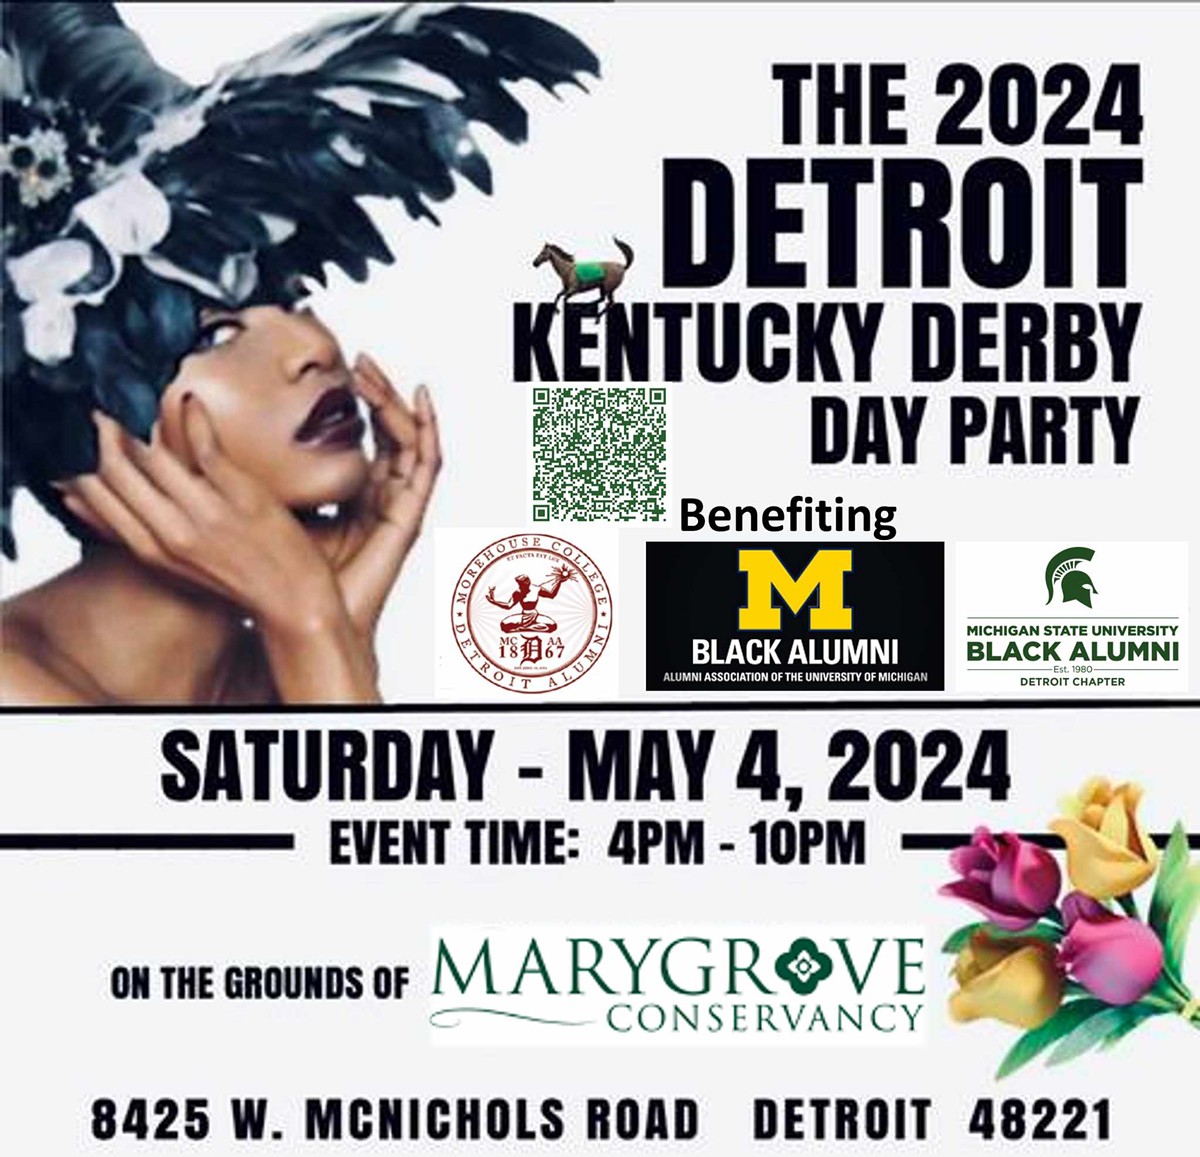 2024 Detroit Kentucky Derby Day Party